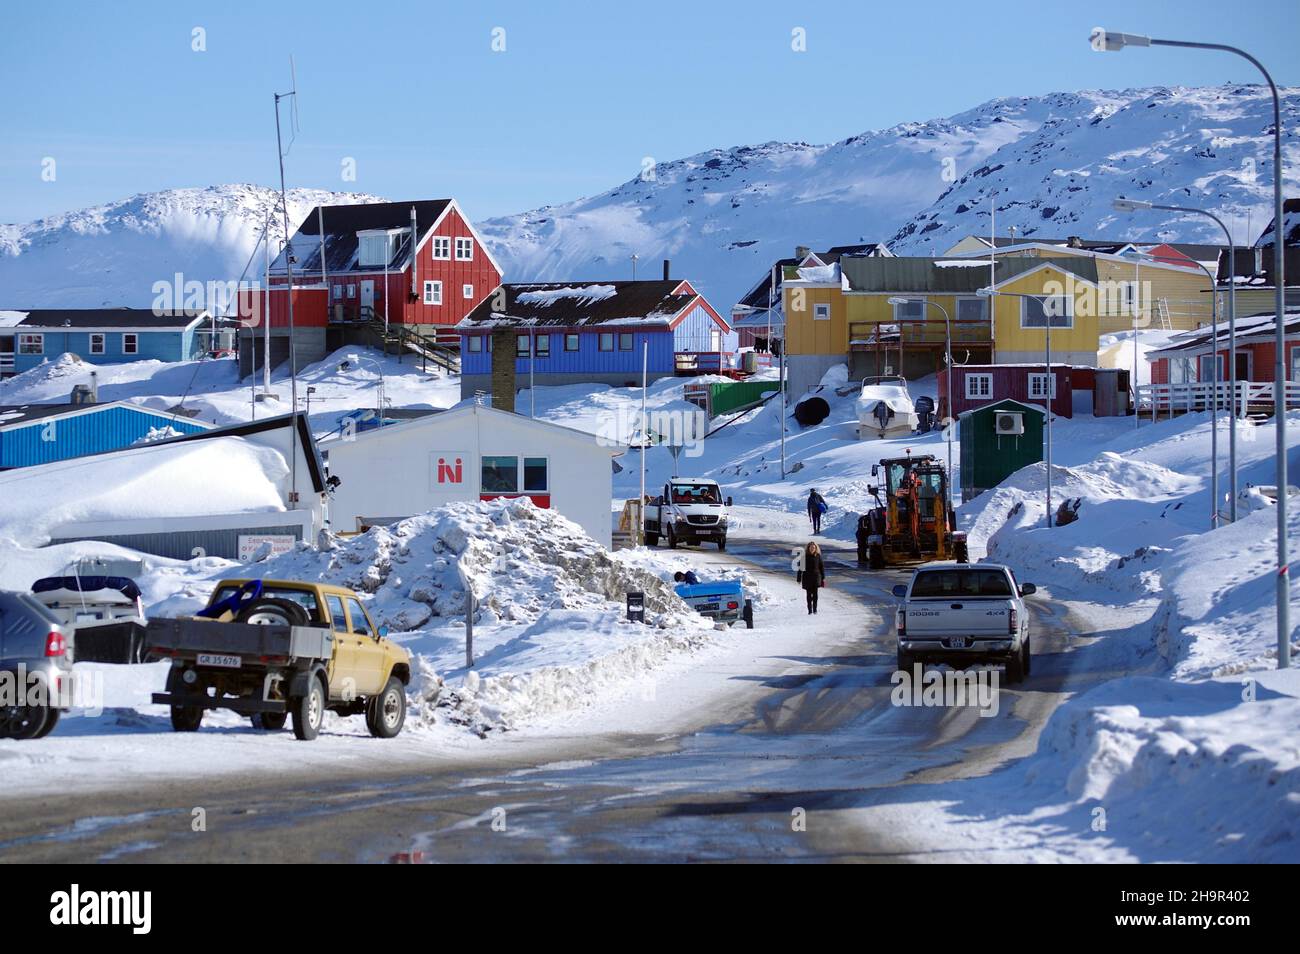 Street with ice, snow, small town, winter, Ilulissat, West Greenland, Arctic, Greenland, Denmark Stock Photo